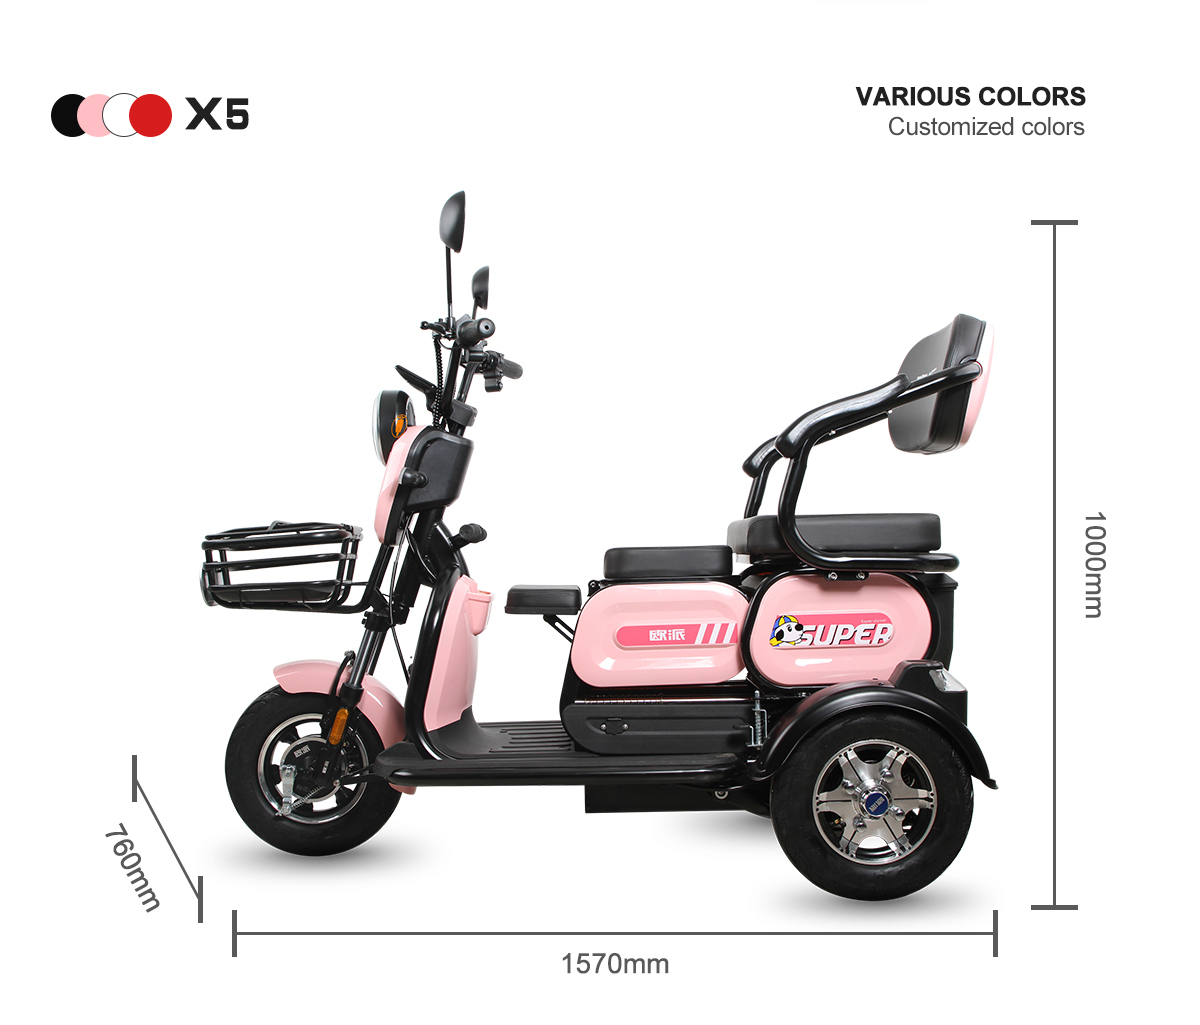 Cyclemix Product Electric Tricycle X5 Details 3